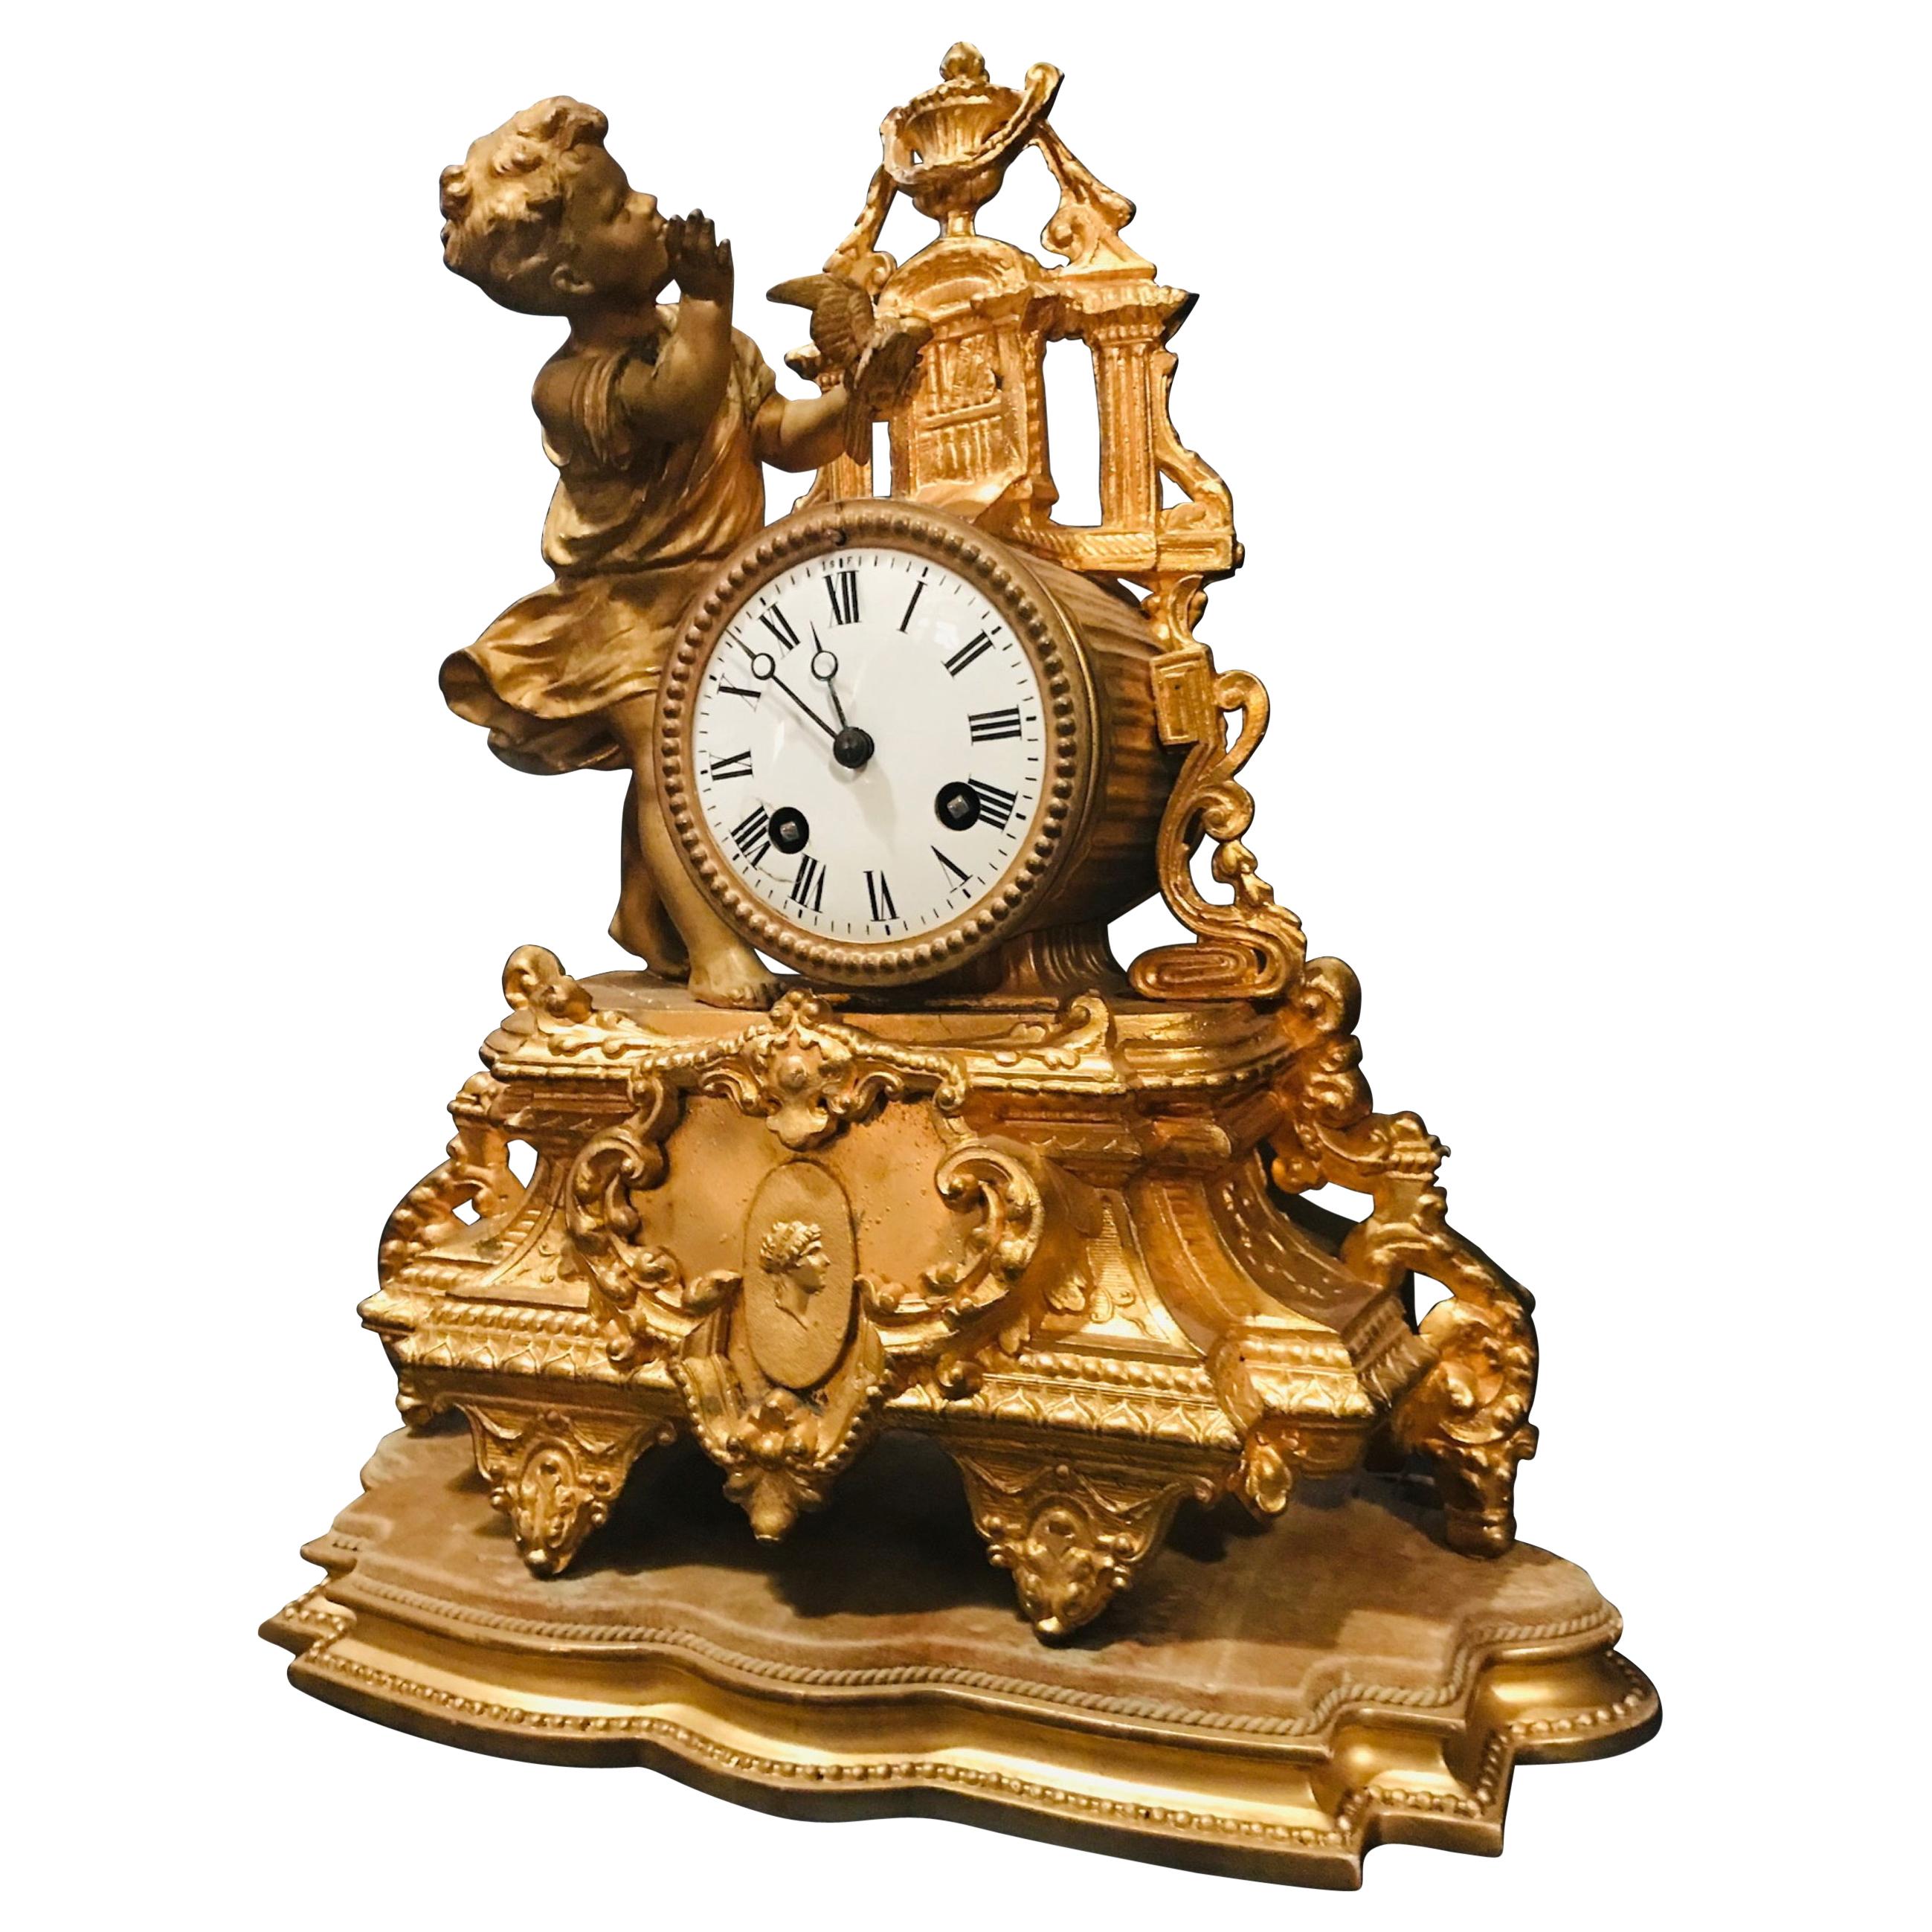 19th Century French Gilt Mantel Clock with Wood Base, Girl with Bird